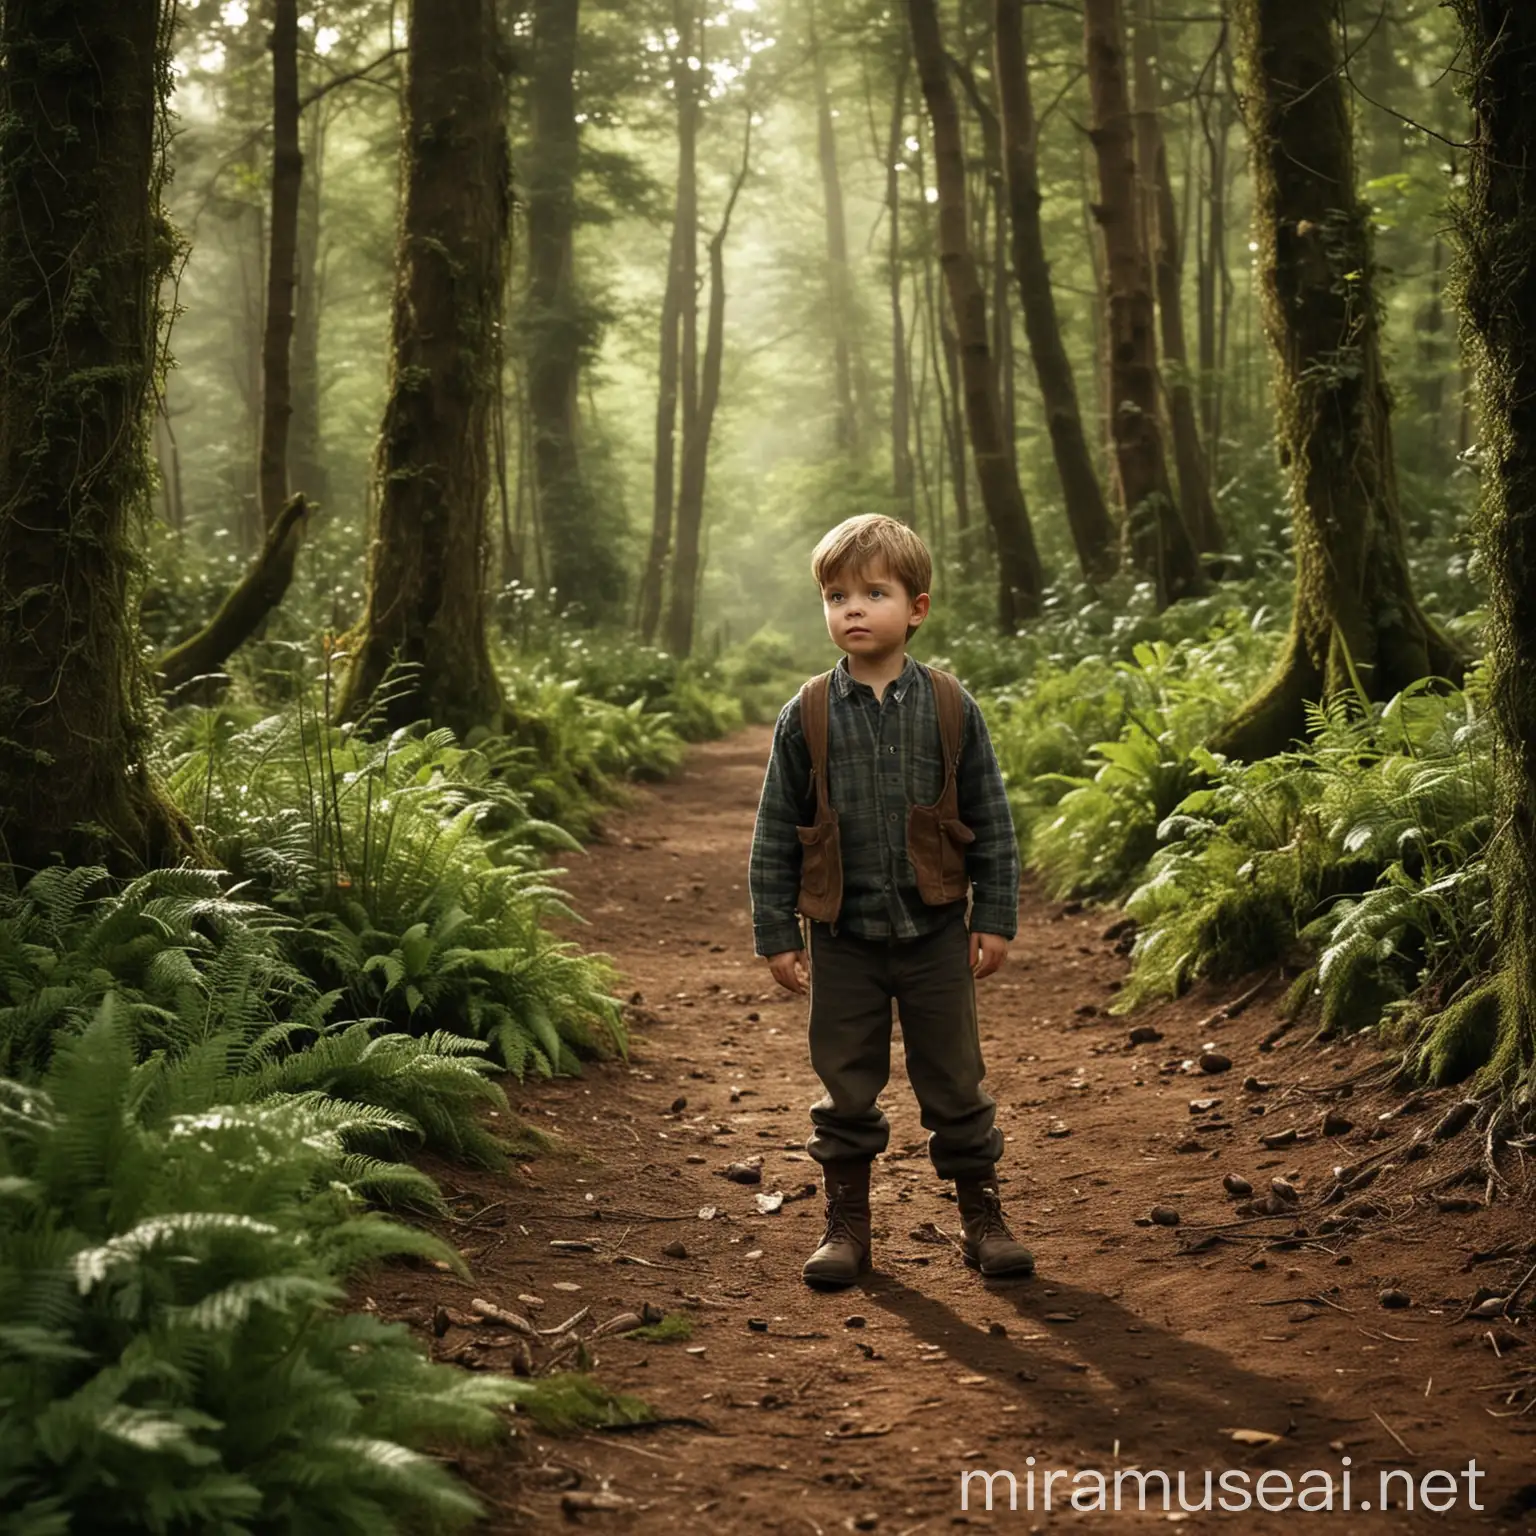 Once upon a time**, in a small village nestled at the edge of a vast forest, there lived a curious little boy named Oliver. Oliver loved exploring and often spent his days wandering through the woods, discovering new plants and animals.